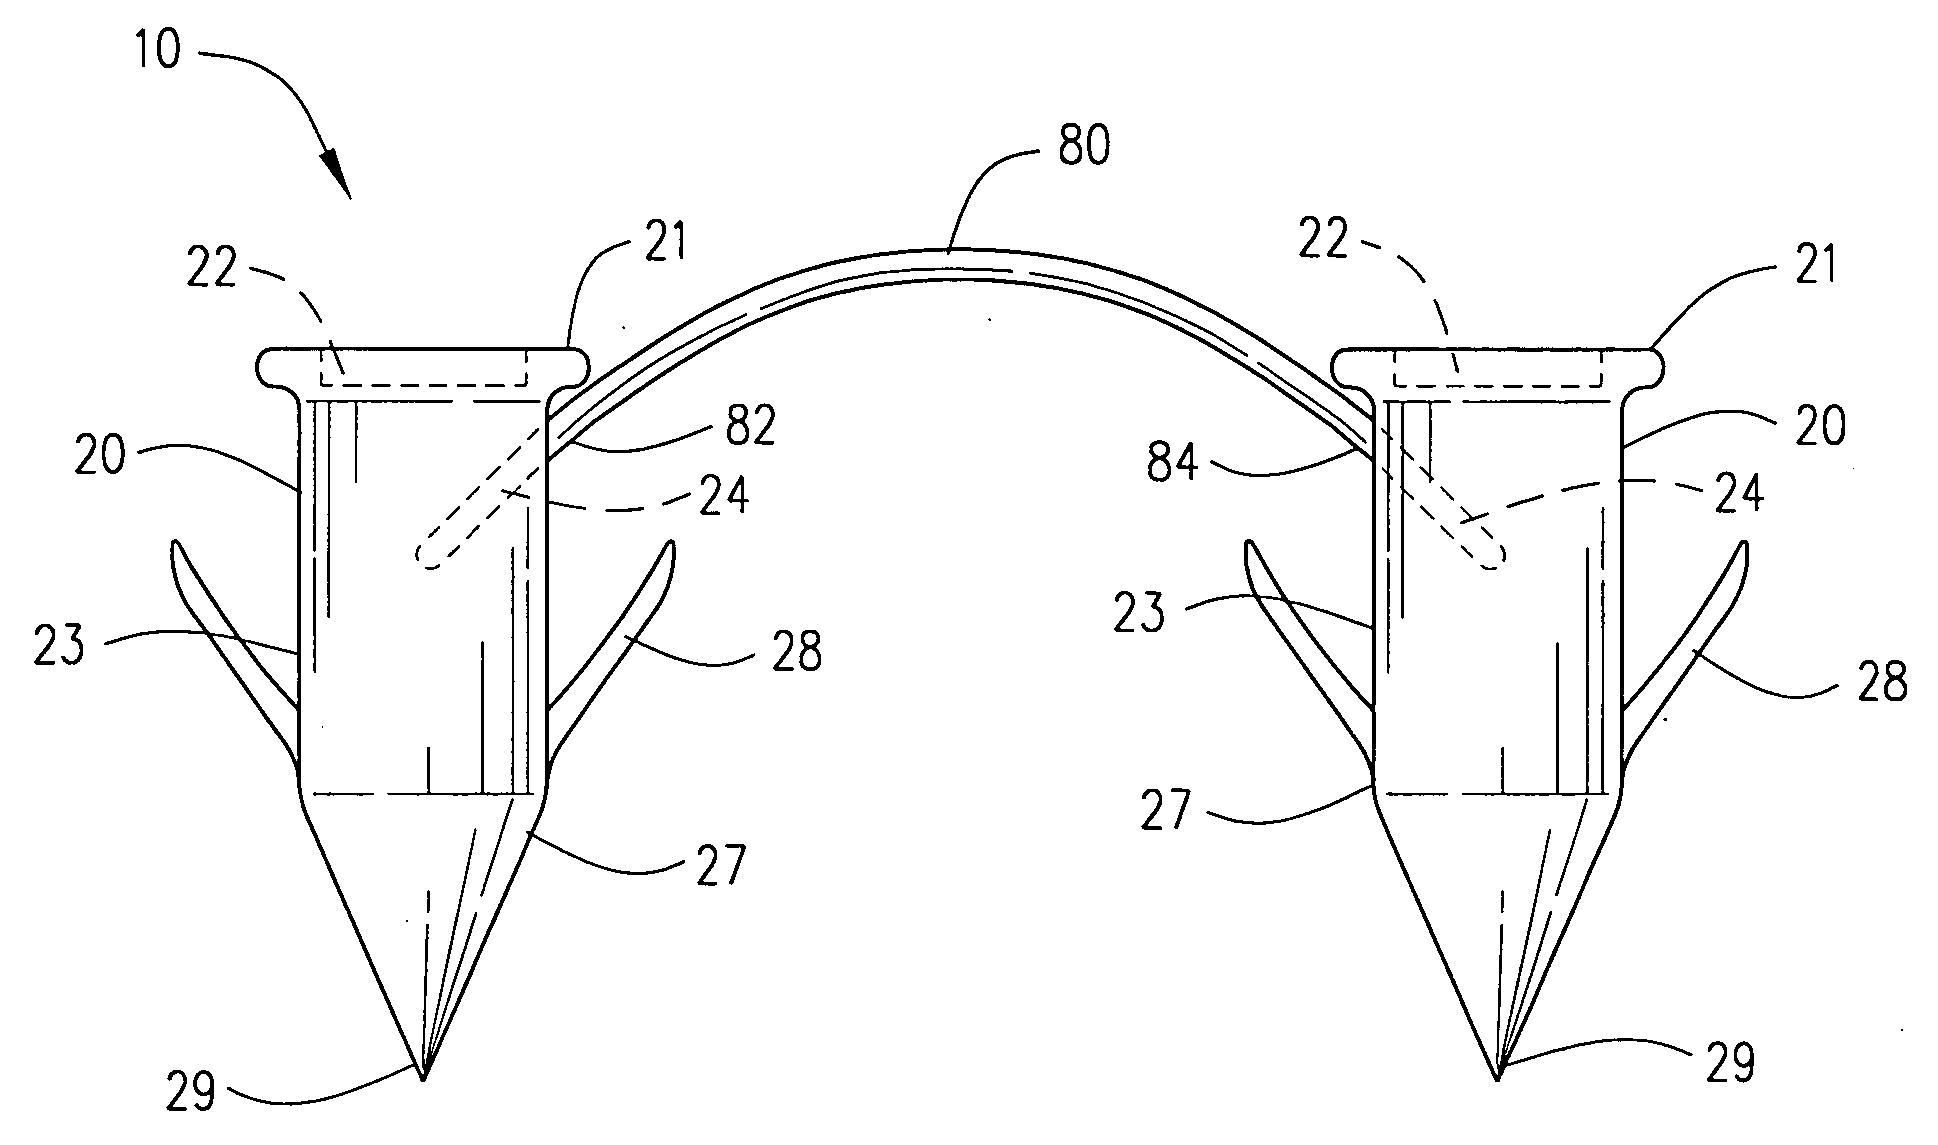 Surgical suture staple and attachment device for securing a soft tissue to a bone